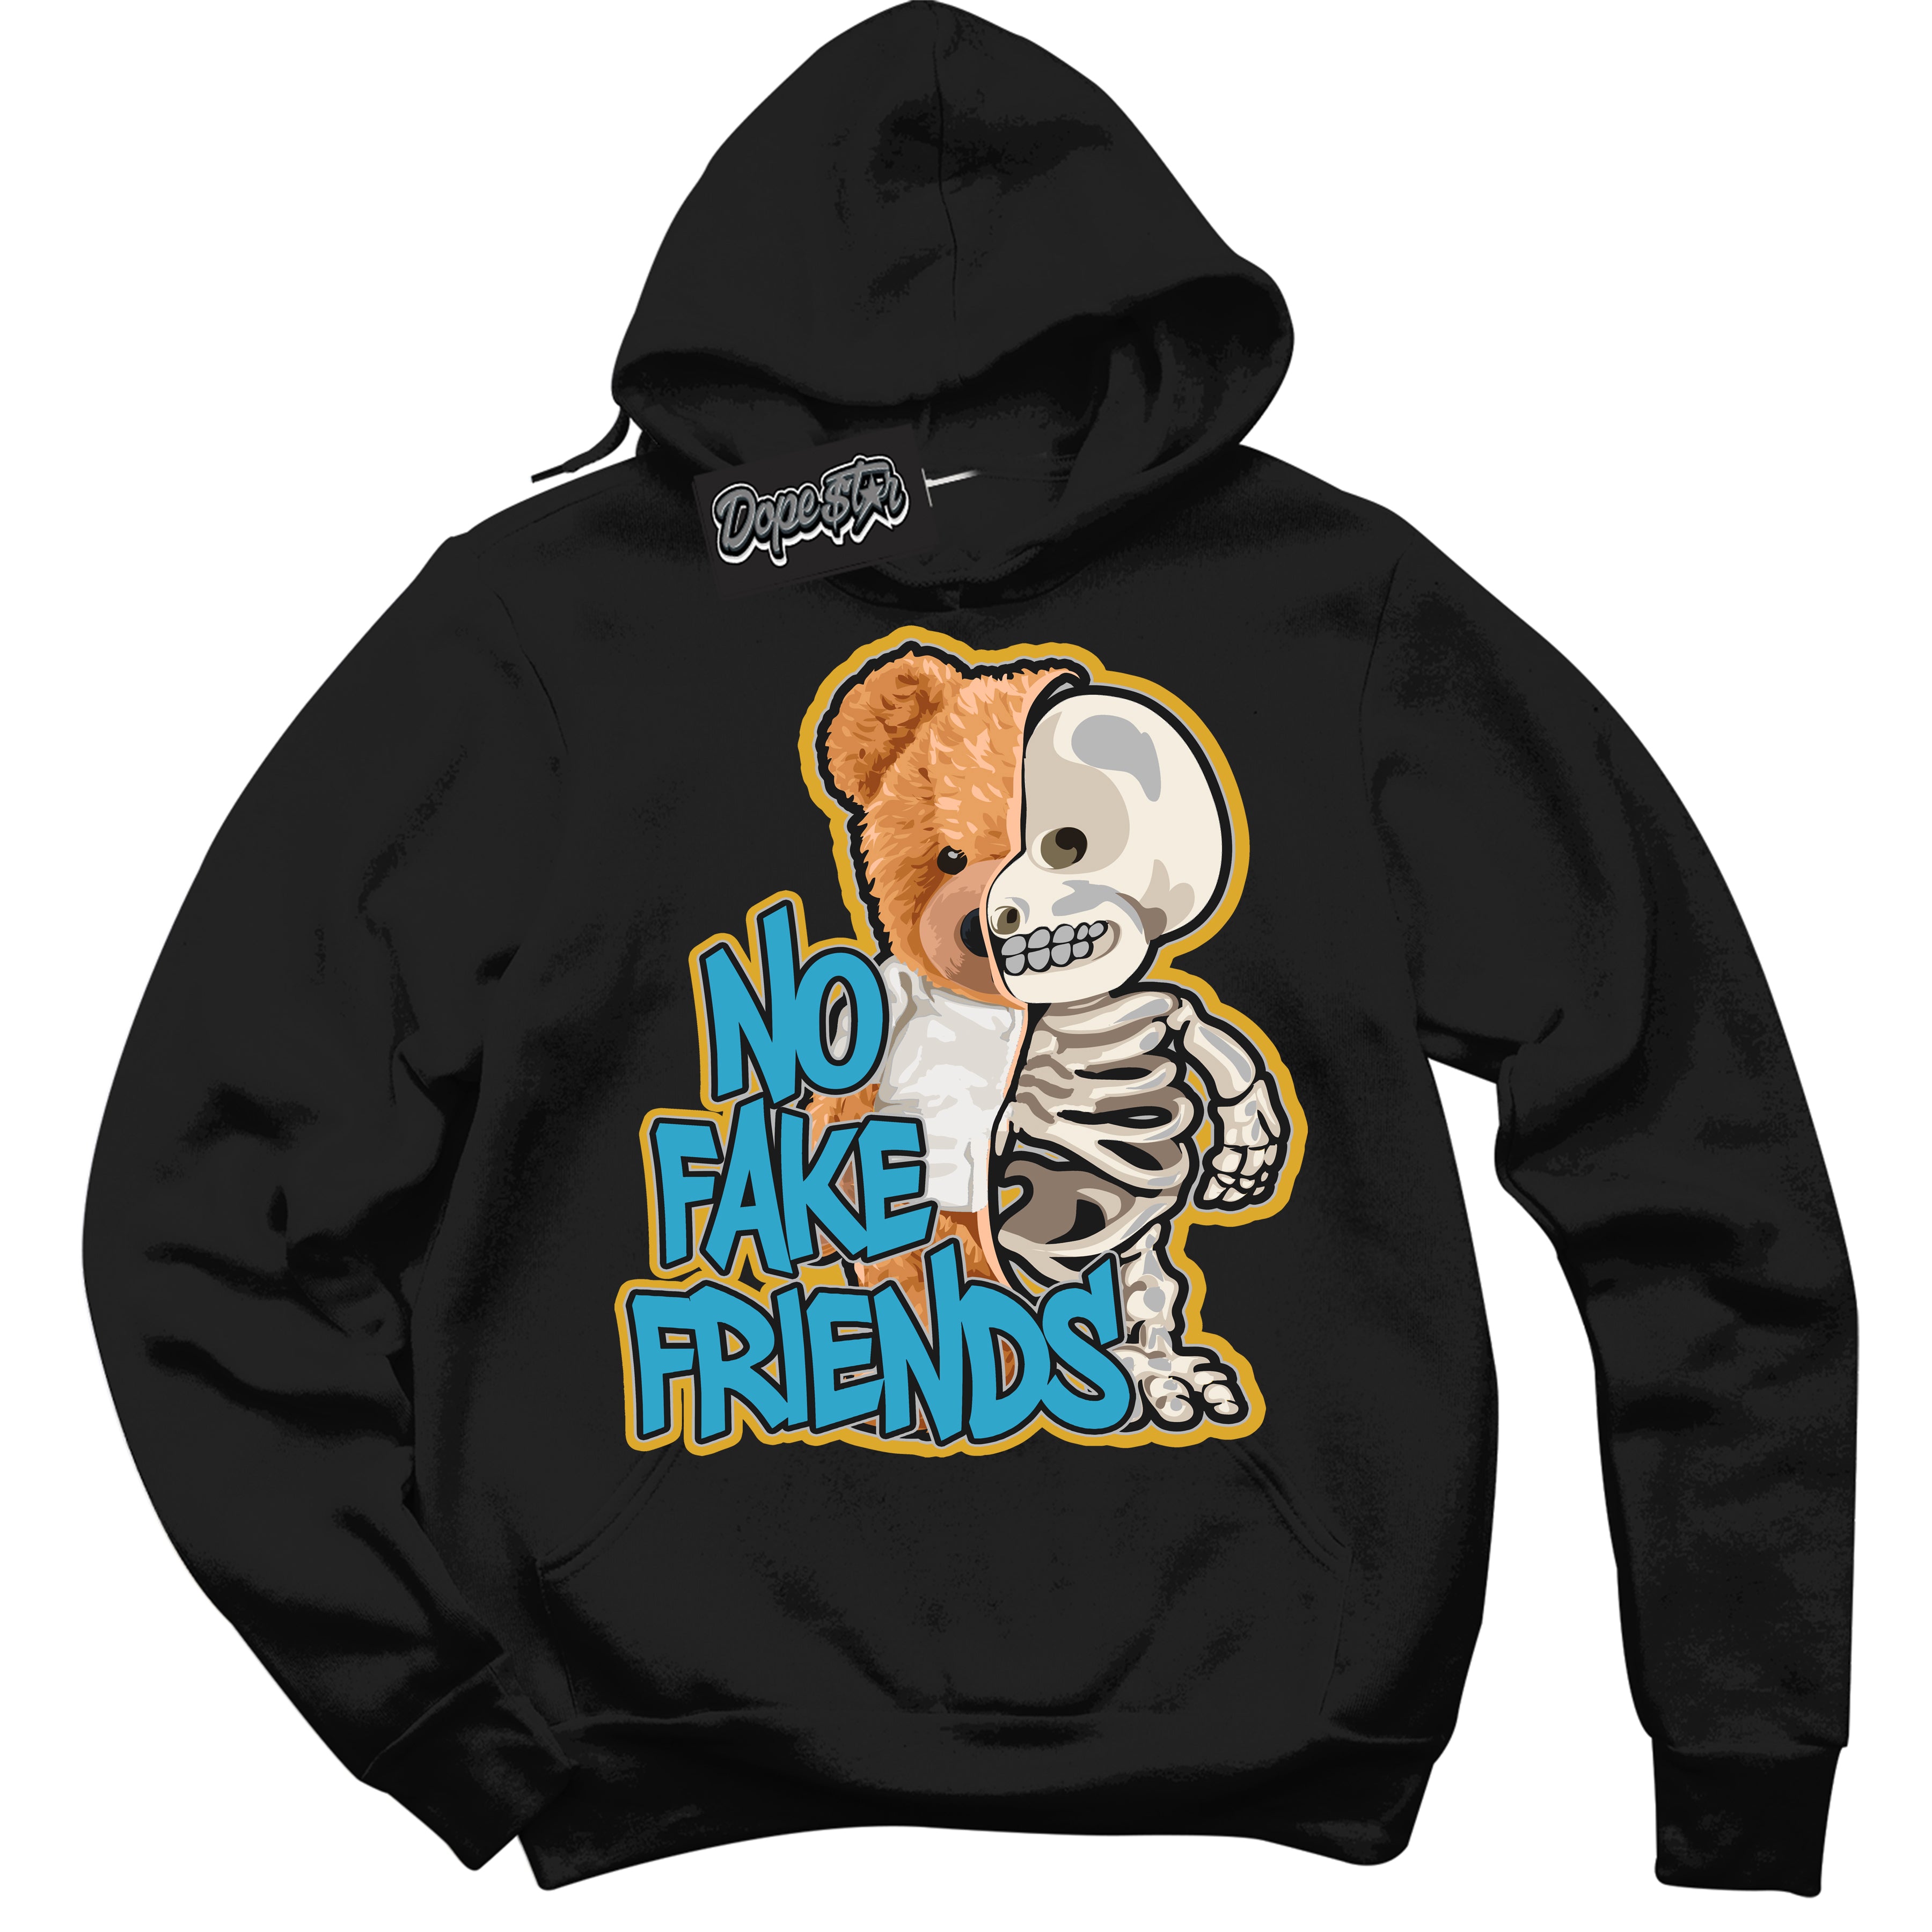 Cool Black Hoodie with “ No Fake Friends ”  design that Perfectly Matches Aqua 5s Sneakers.